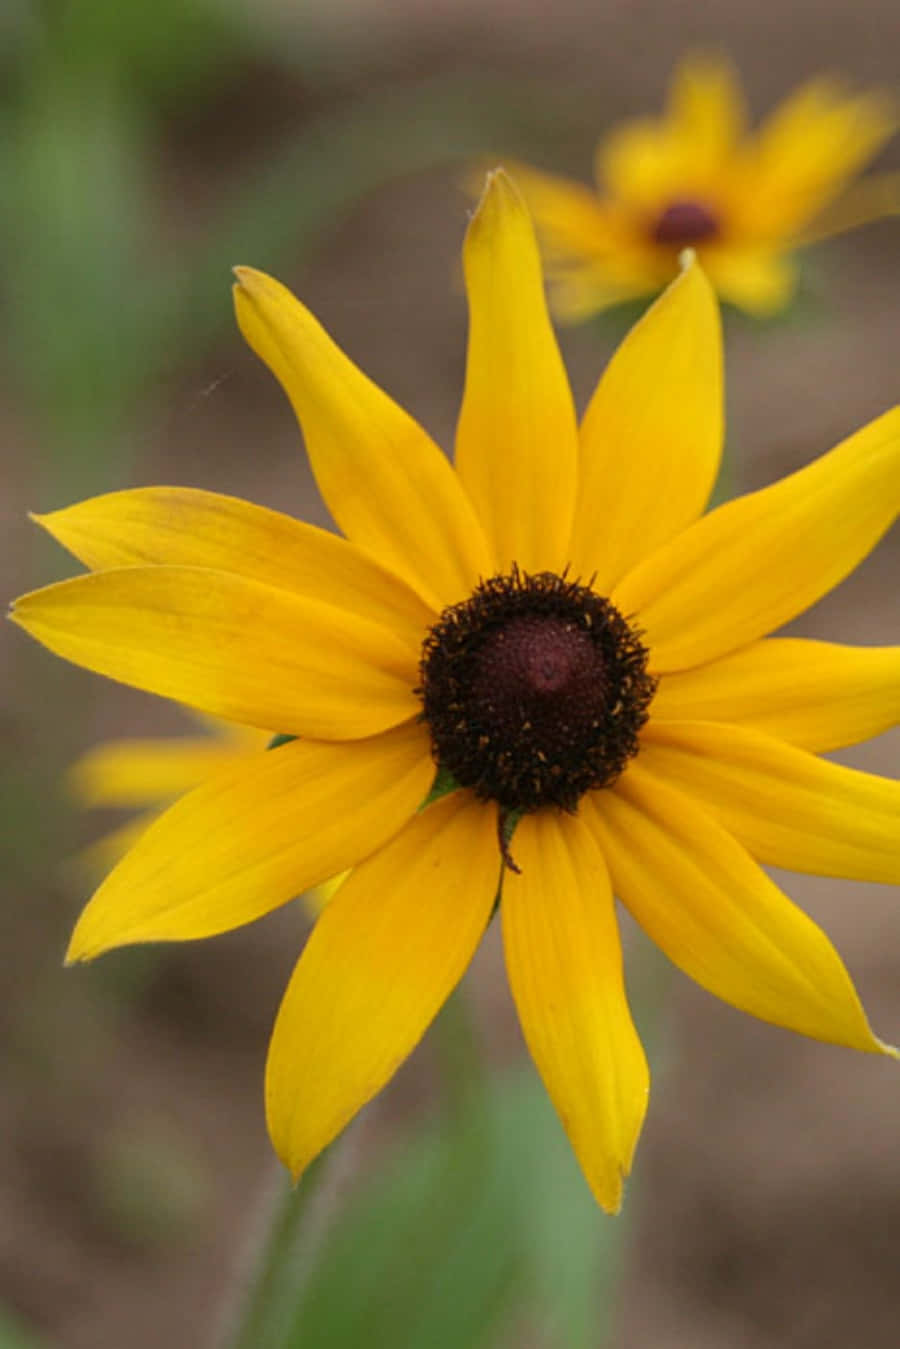 Bright colors of the Black-Eyed Susan adorn this field of wildflowers. Wallpaper